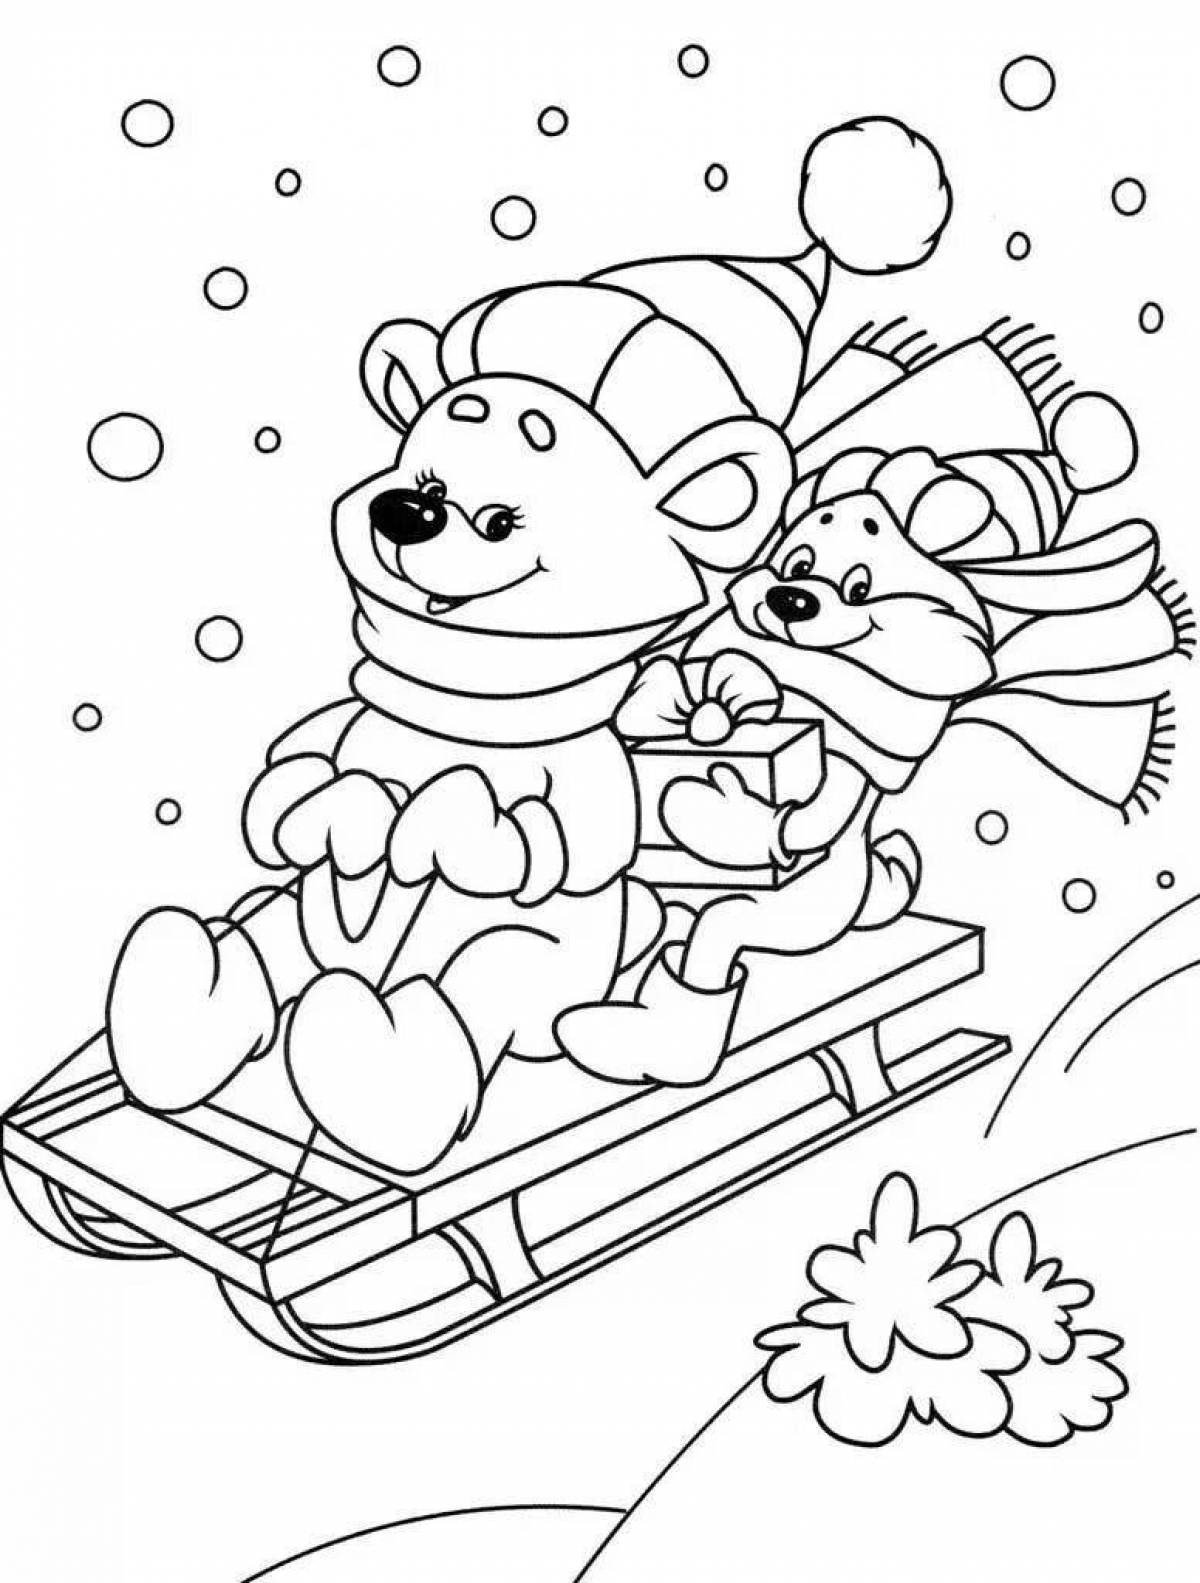 Violent winter coloring for children 6-7 years old